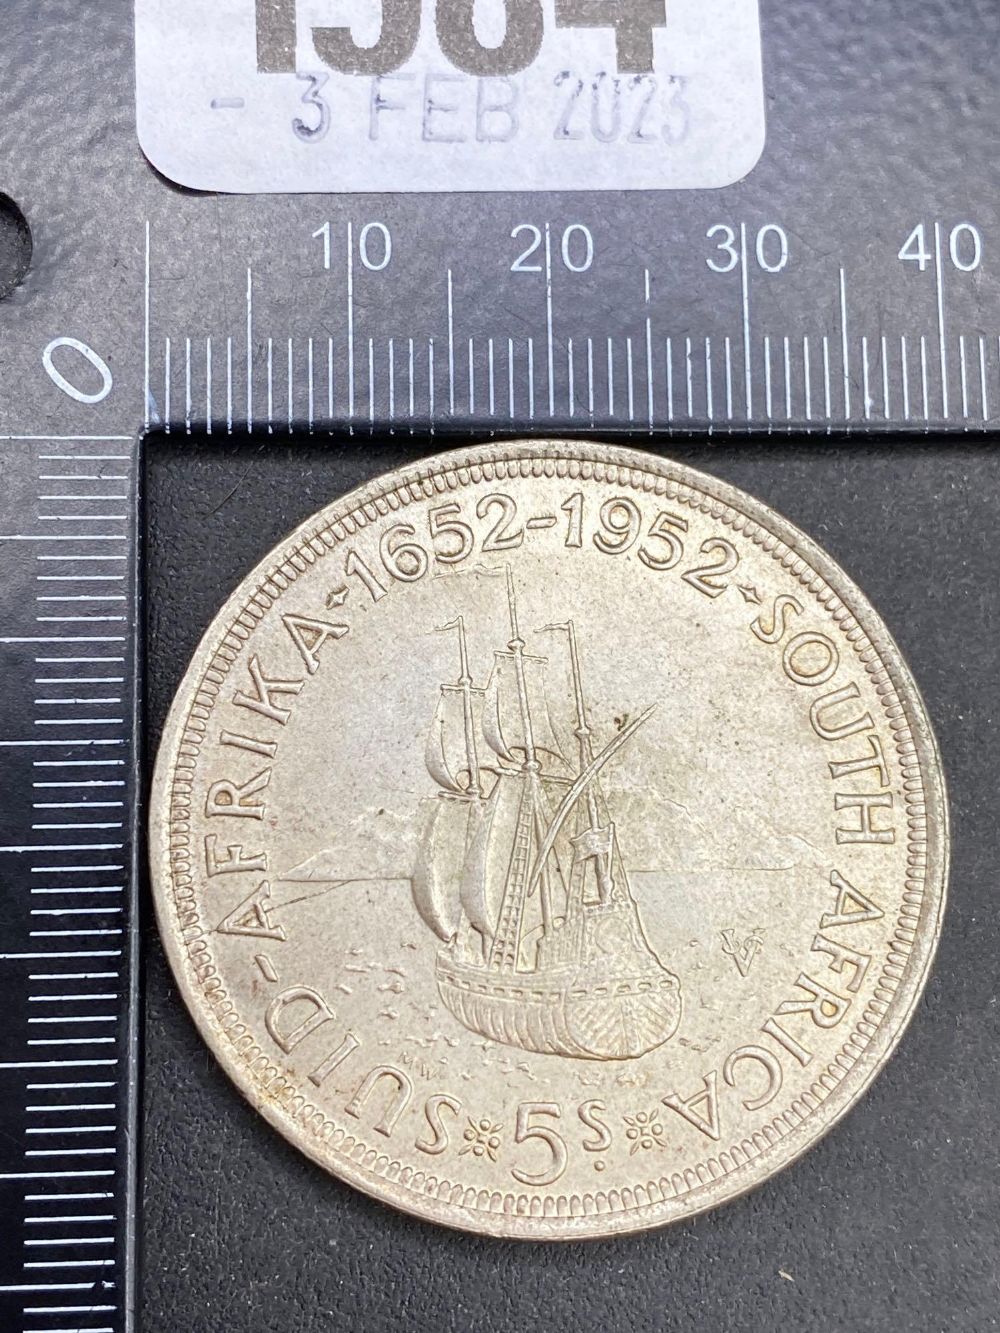 South Africa crown 1952 - Image 2 of 2